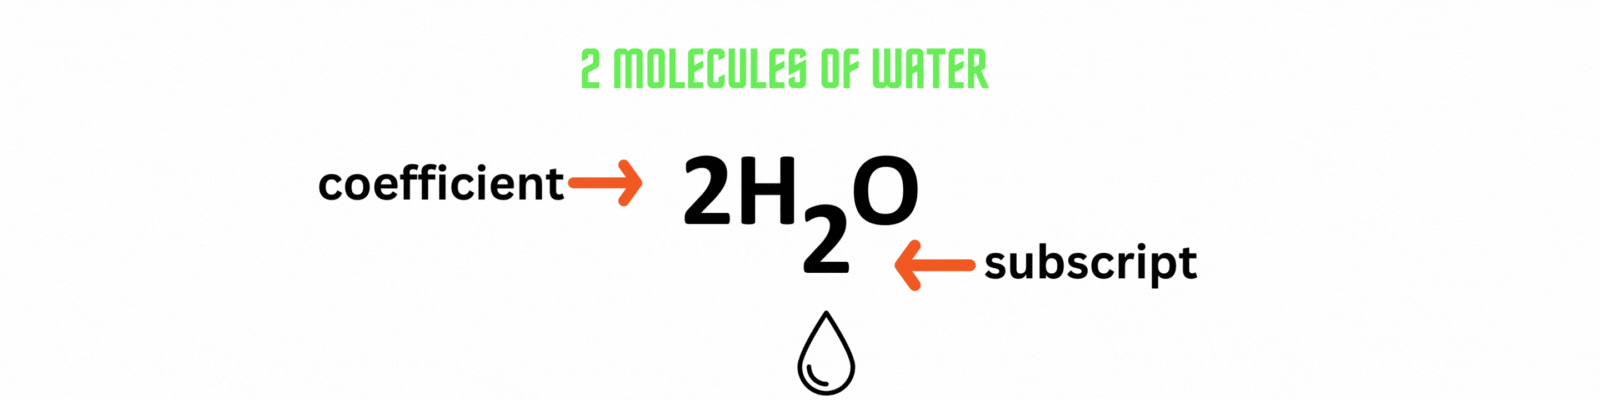 2 molecules of water chemical formula. 2 before H in regular script, 2 after H in subscript.